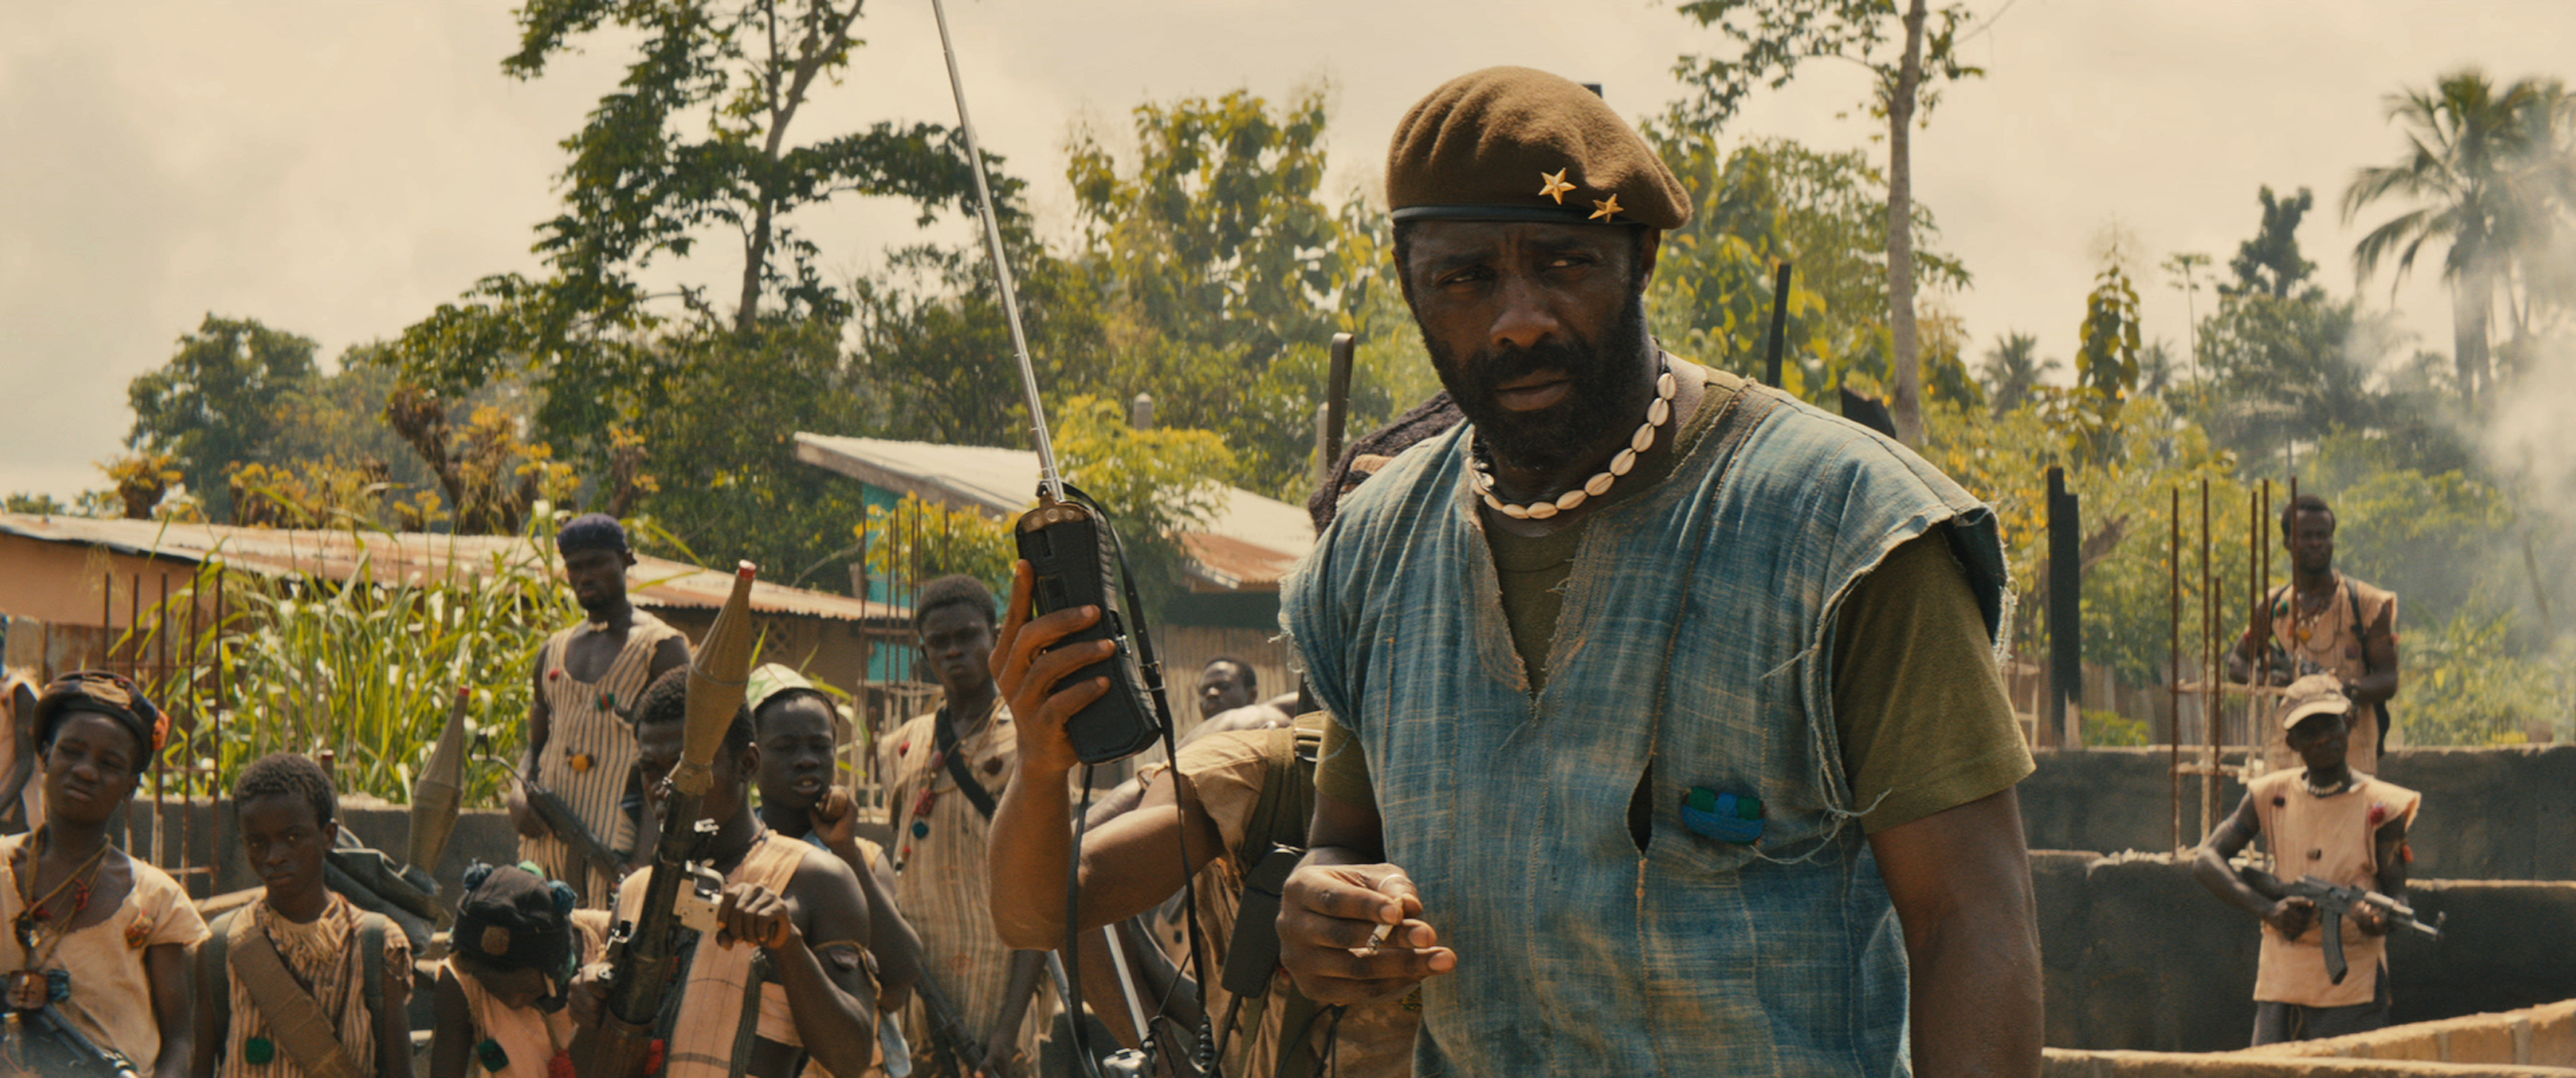 Idris Elba in Beasts of No Nation, one of the Best Netflix movies